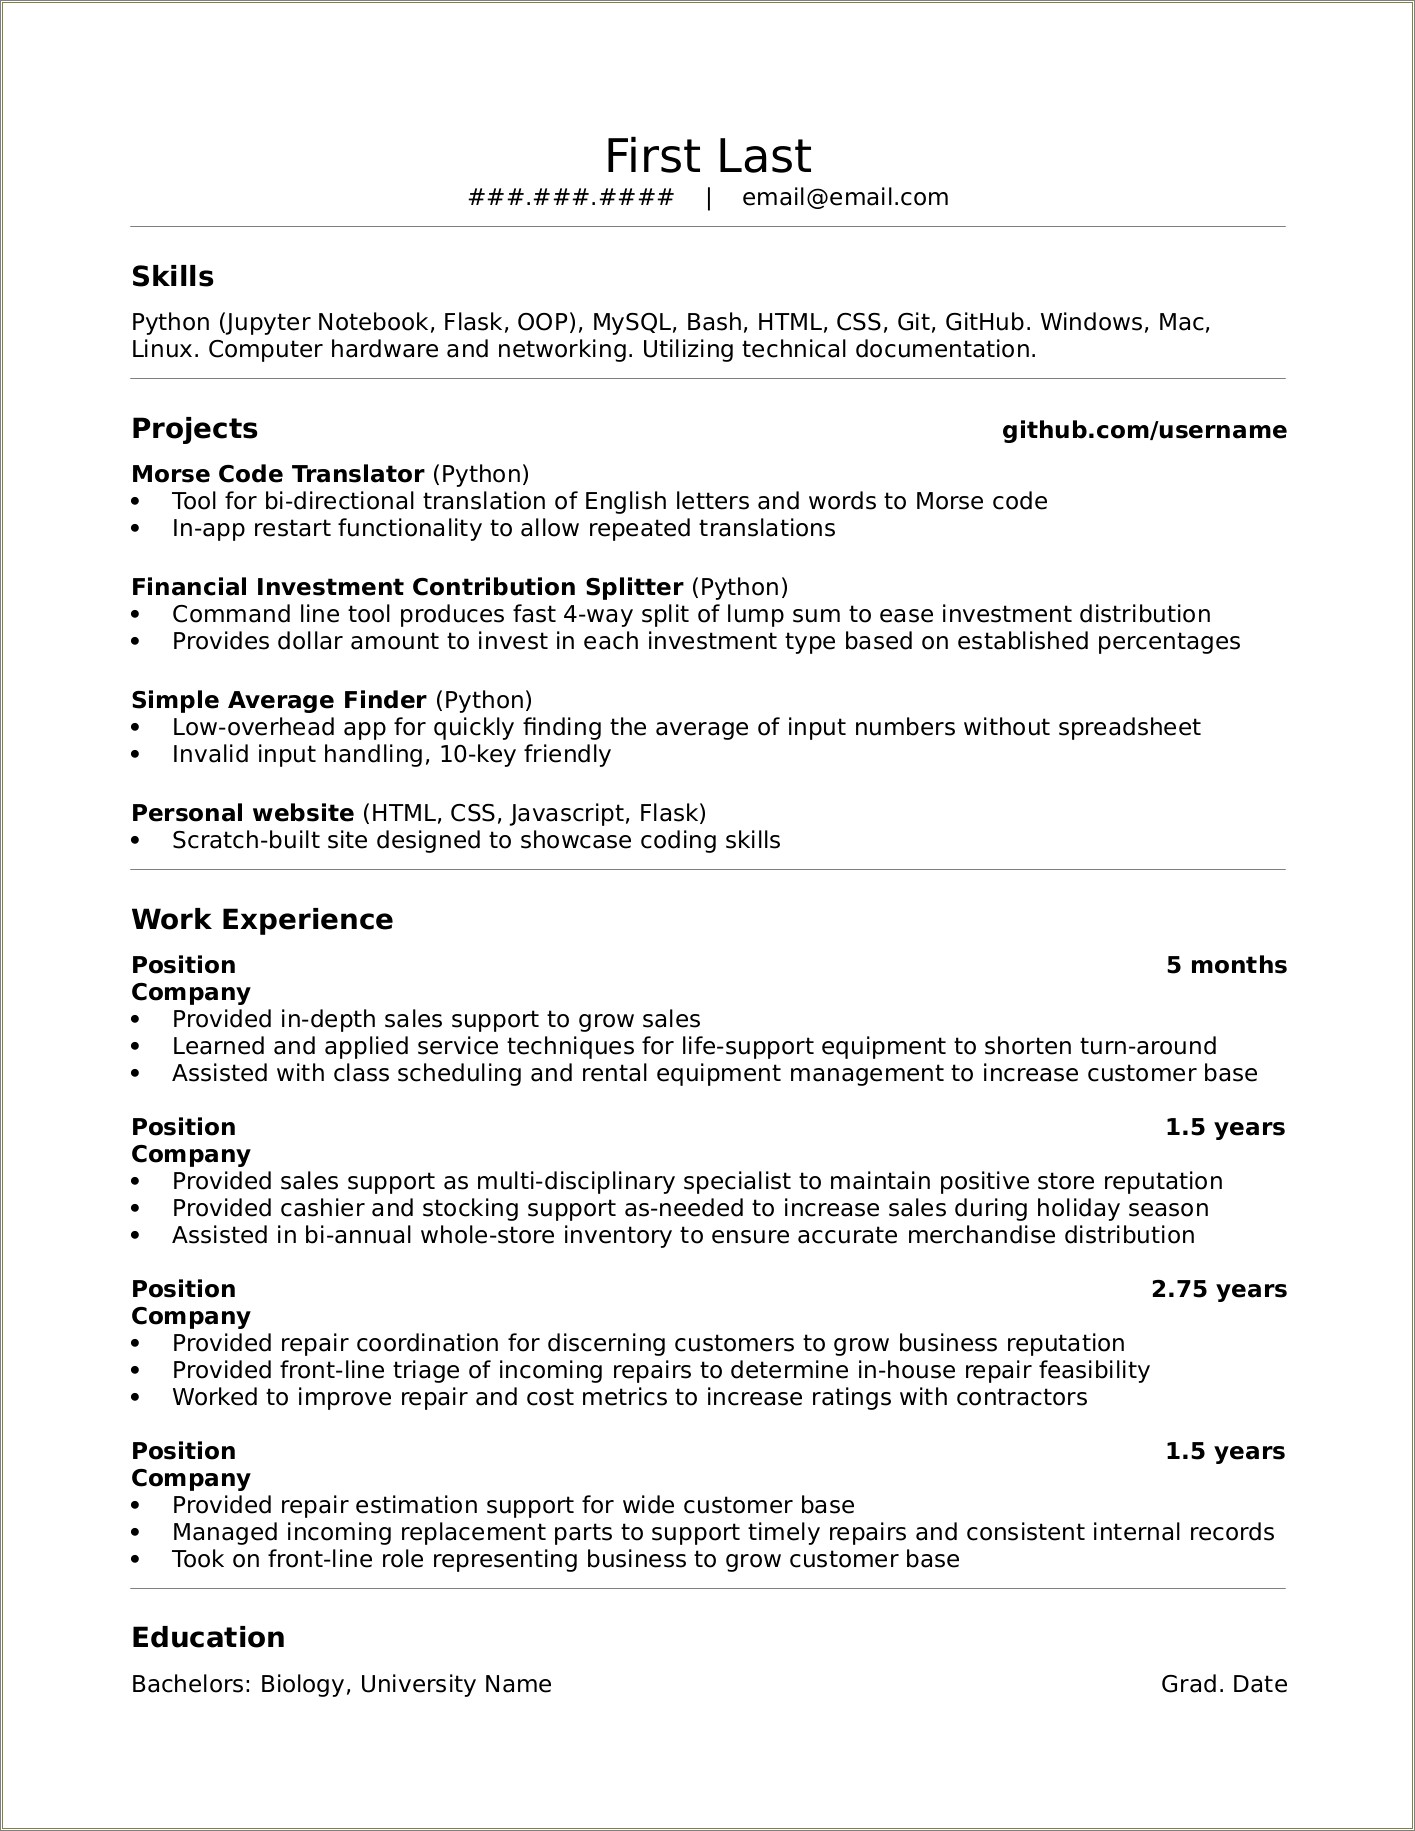 Where Would You Put Boot Camp In Resume